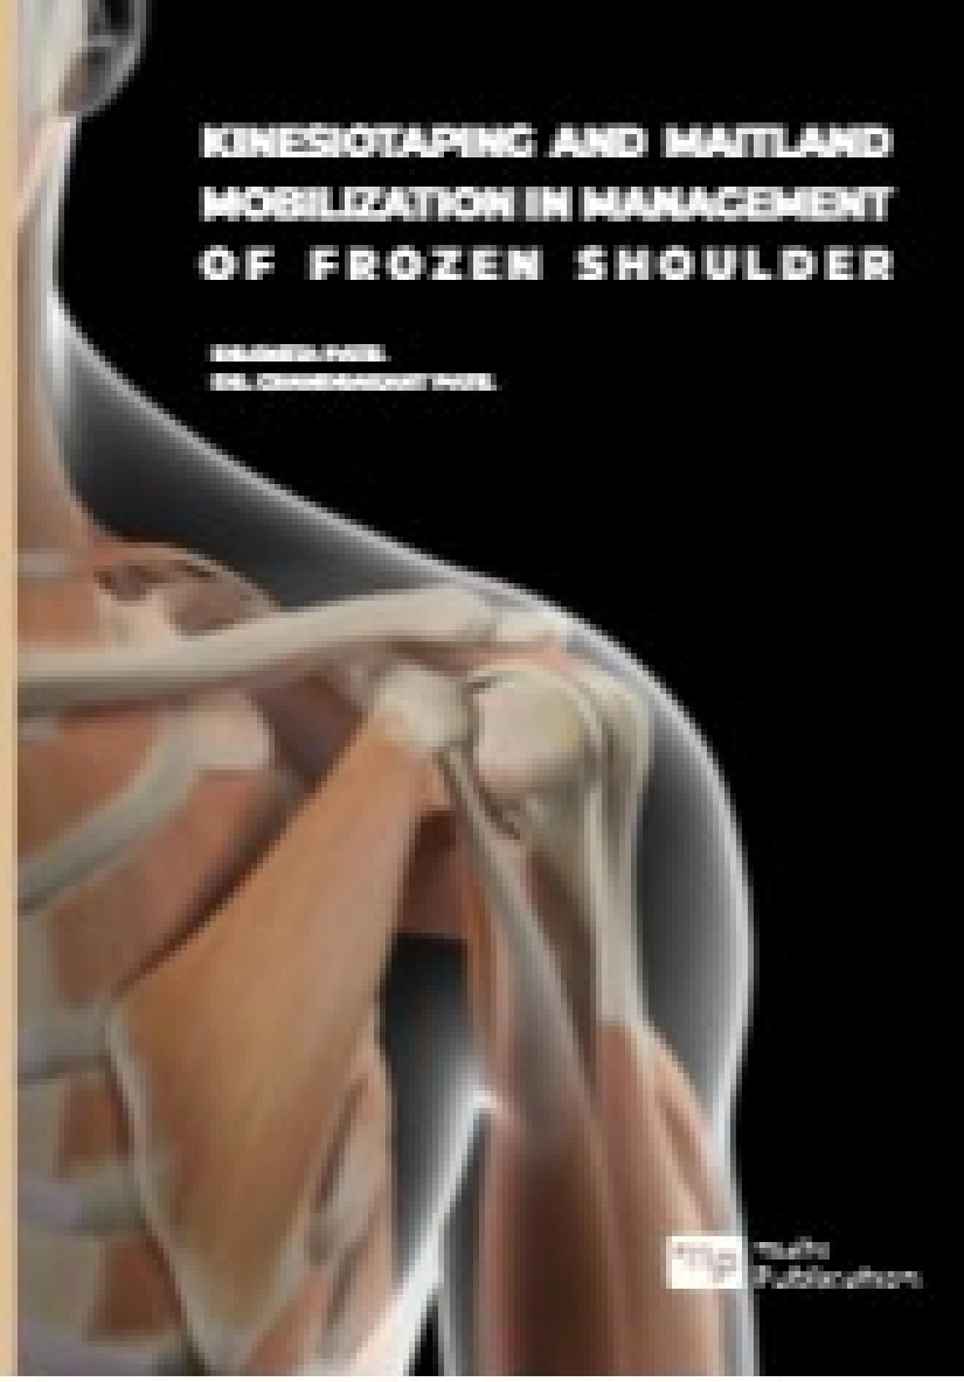 Kinesiotaping And Maitland Mobilization In Management Of Frozen Shoulder